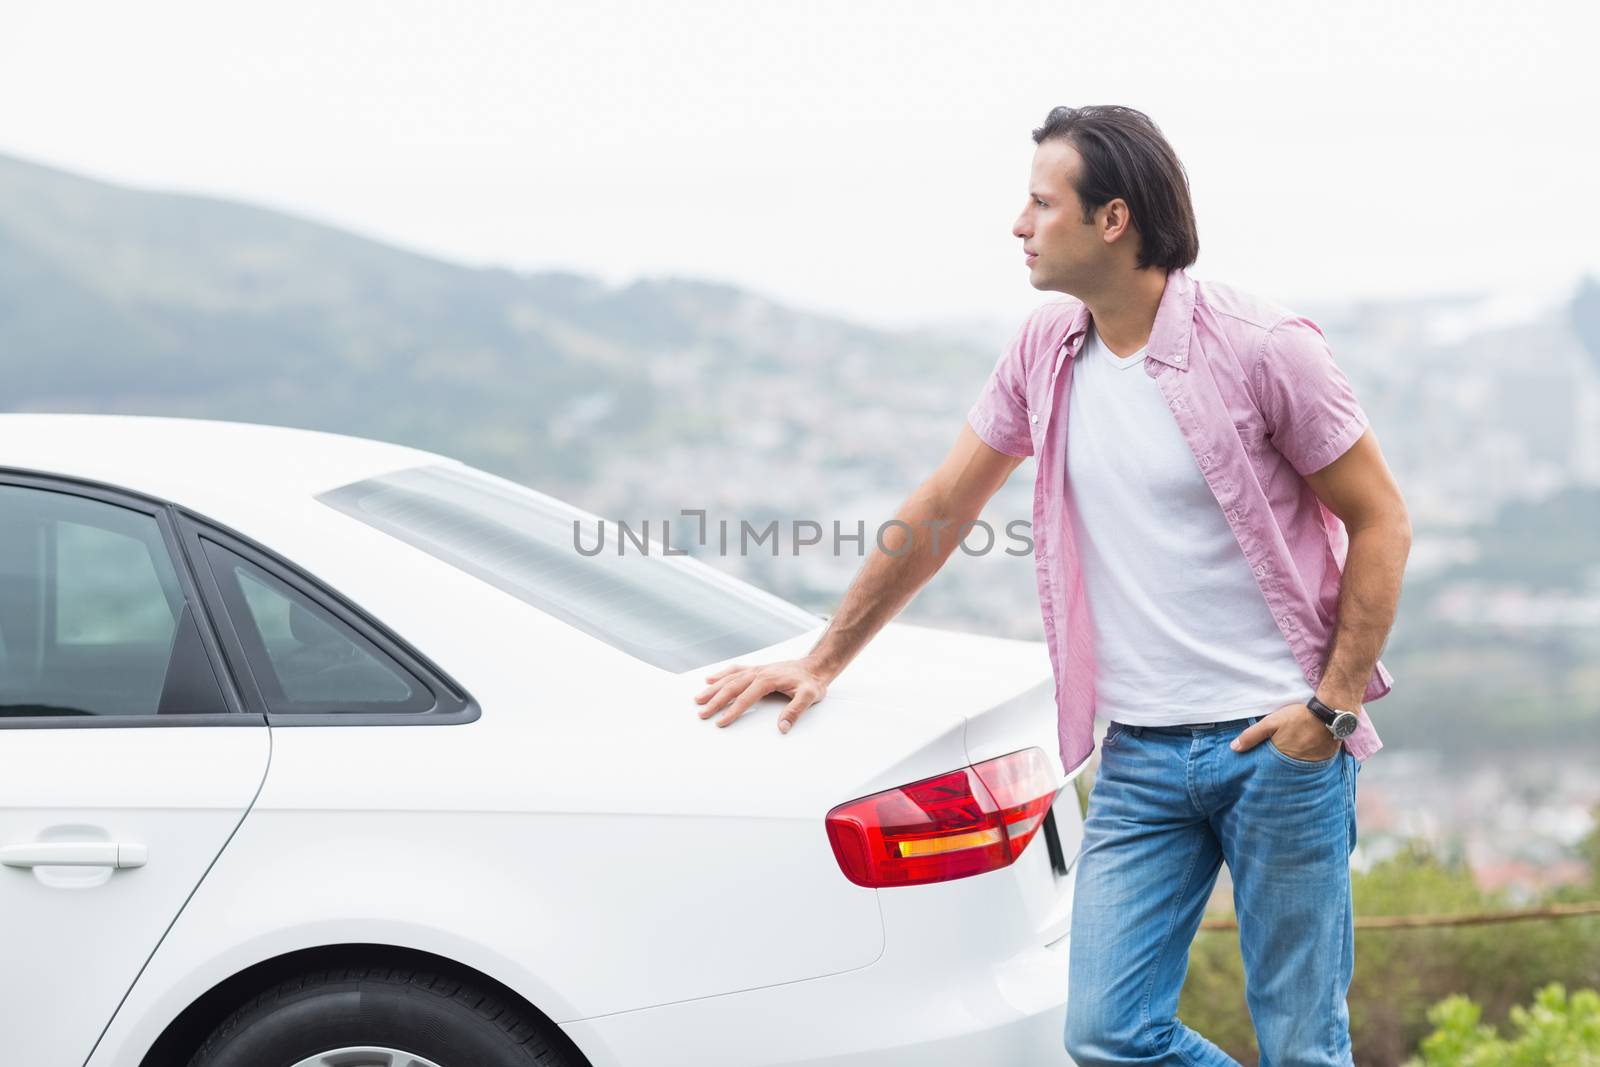 Man standing next to his car at the side of the road